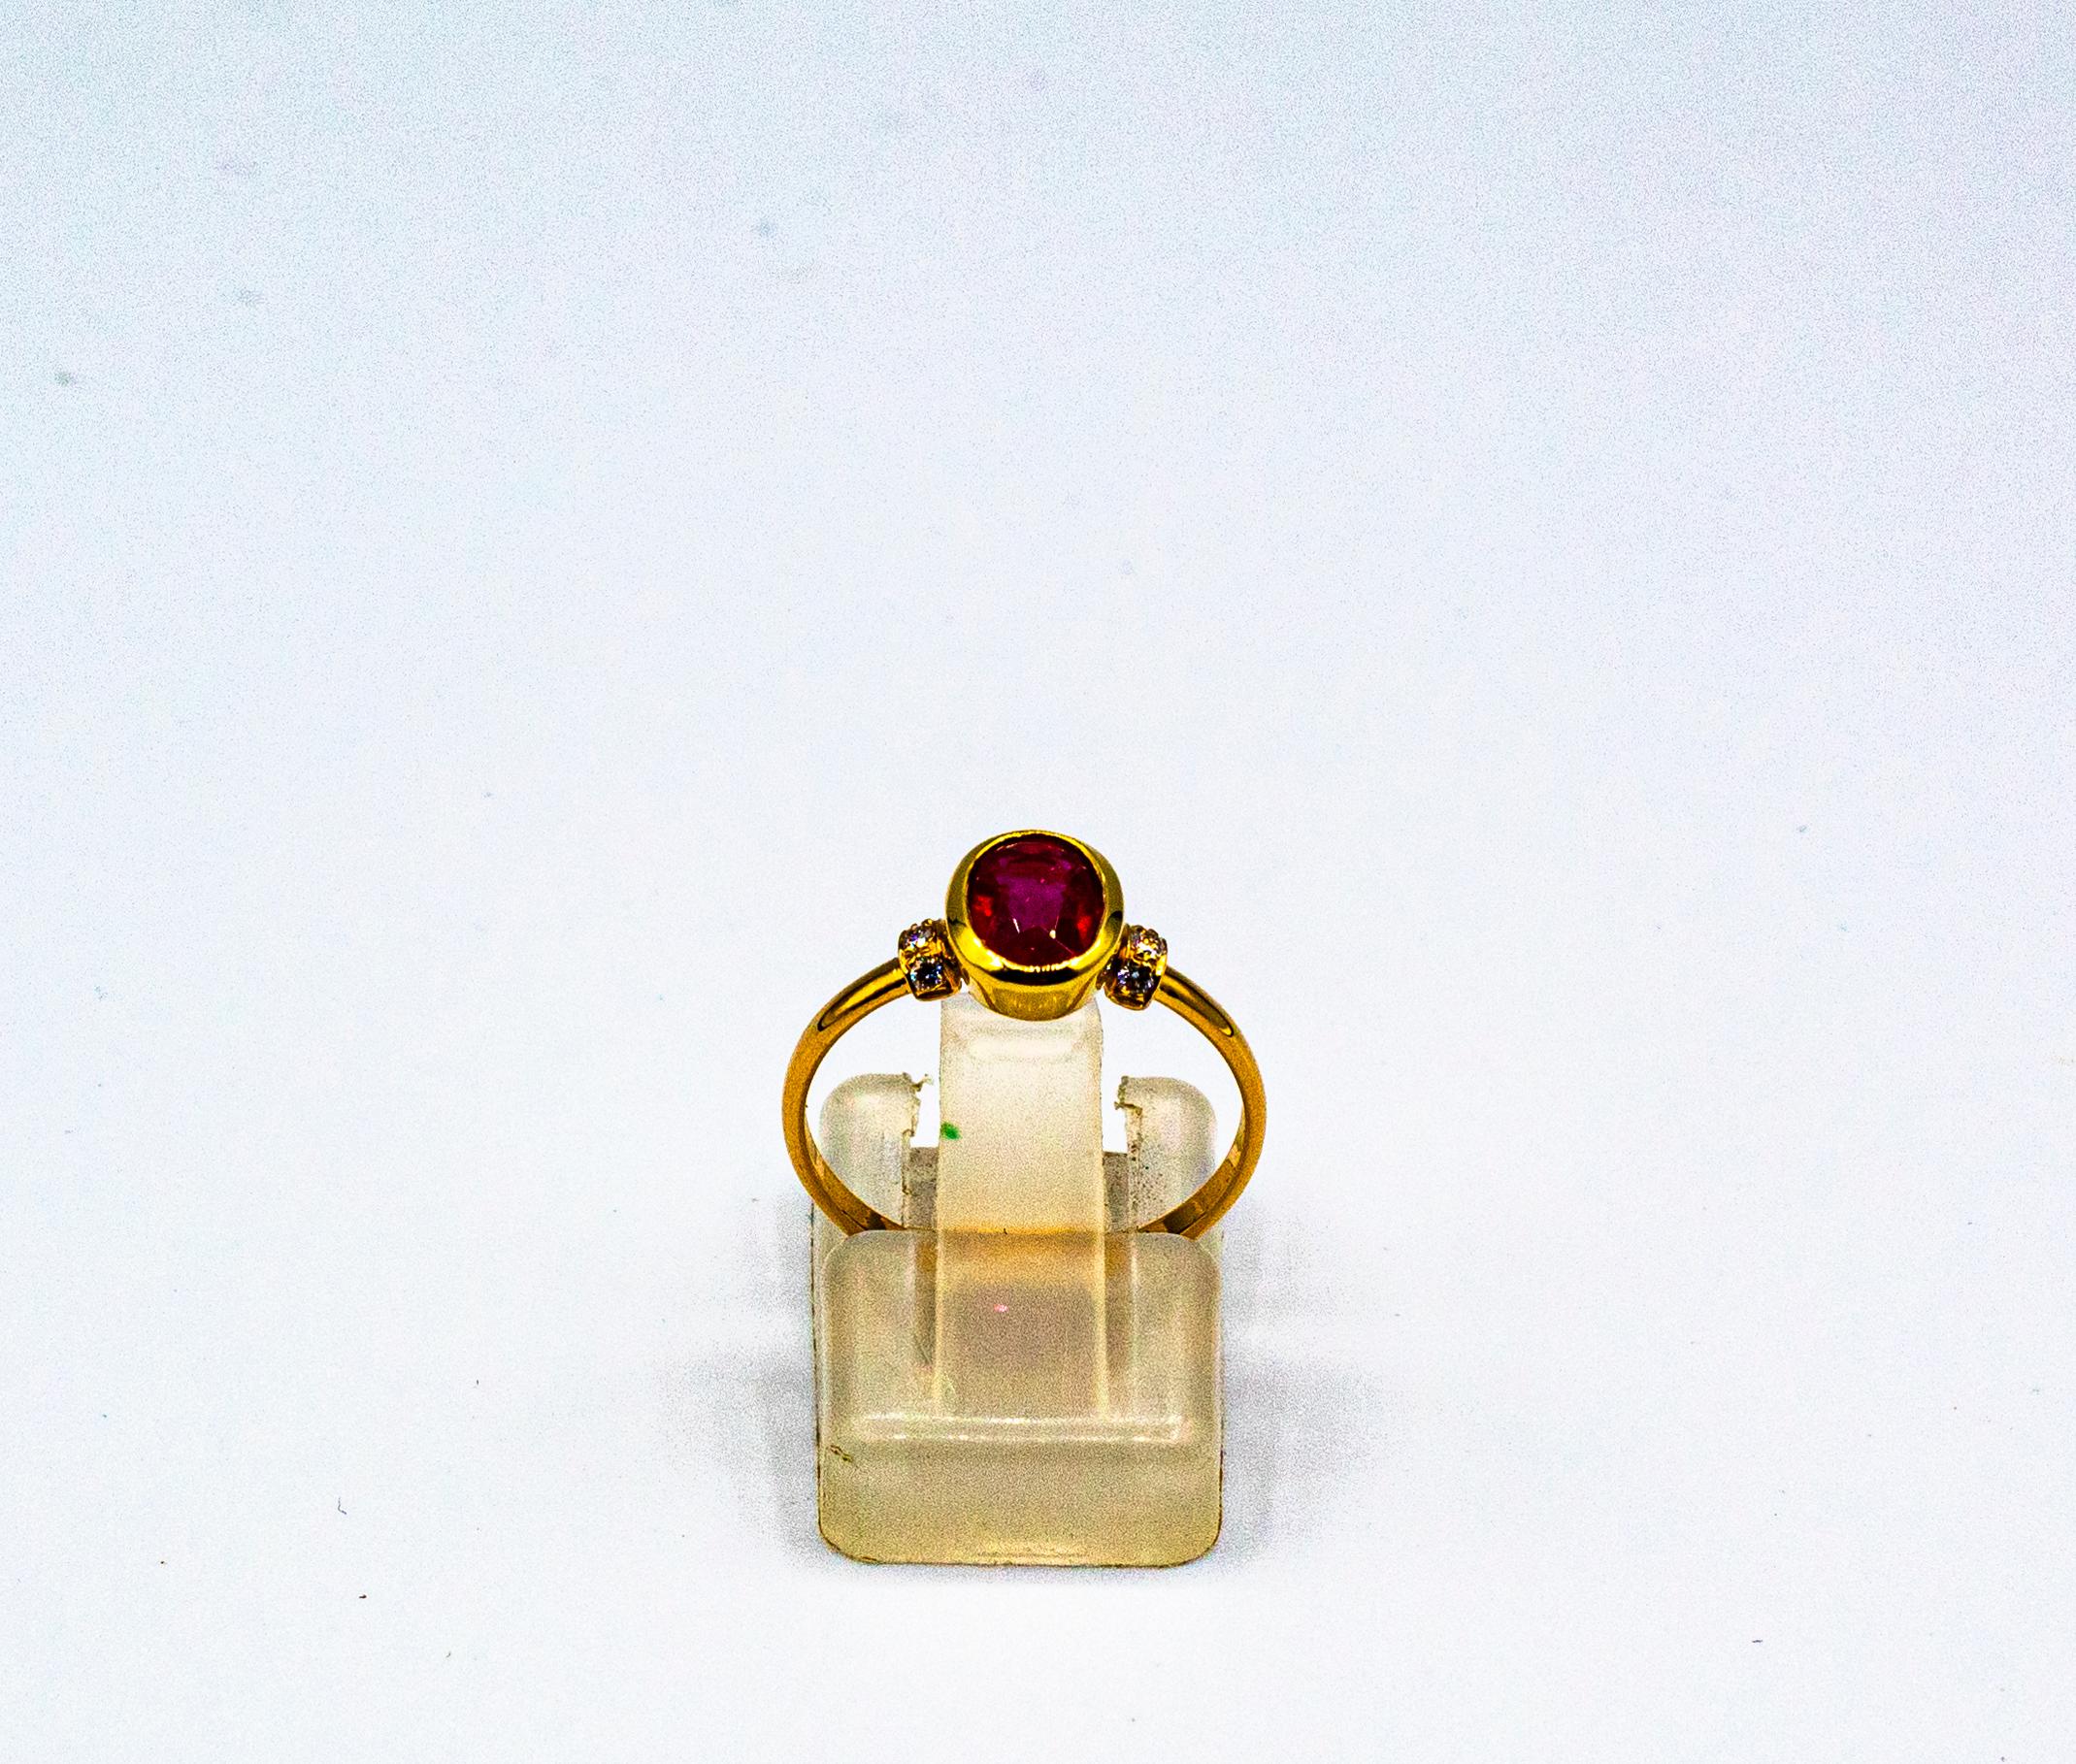 Brilliant Cut Art Deco Style 1.06 Carat White Diamond Oval Cut Ruby Yellow Gold Cocktail Ring